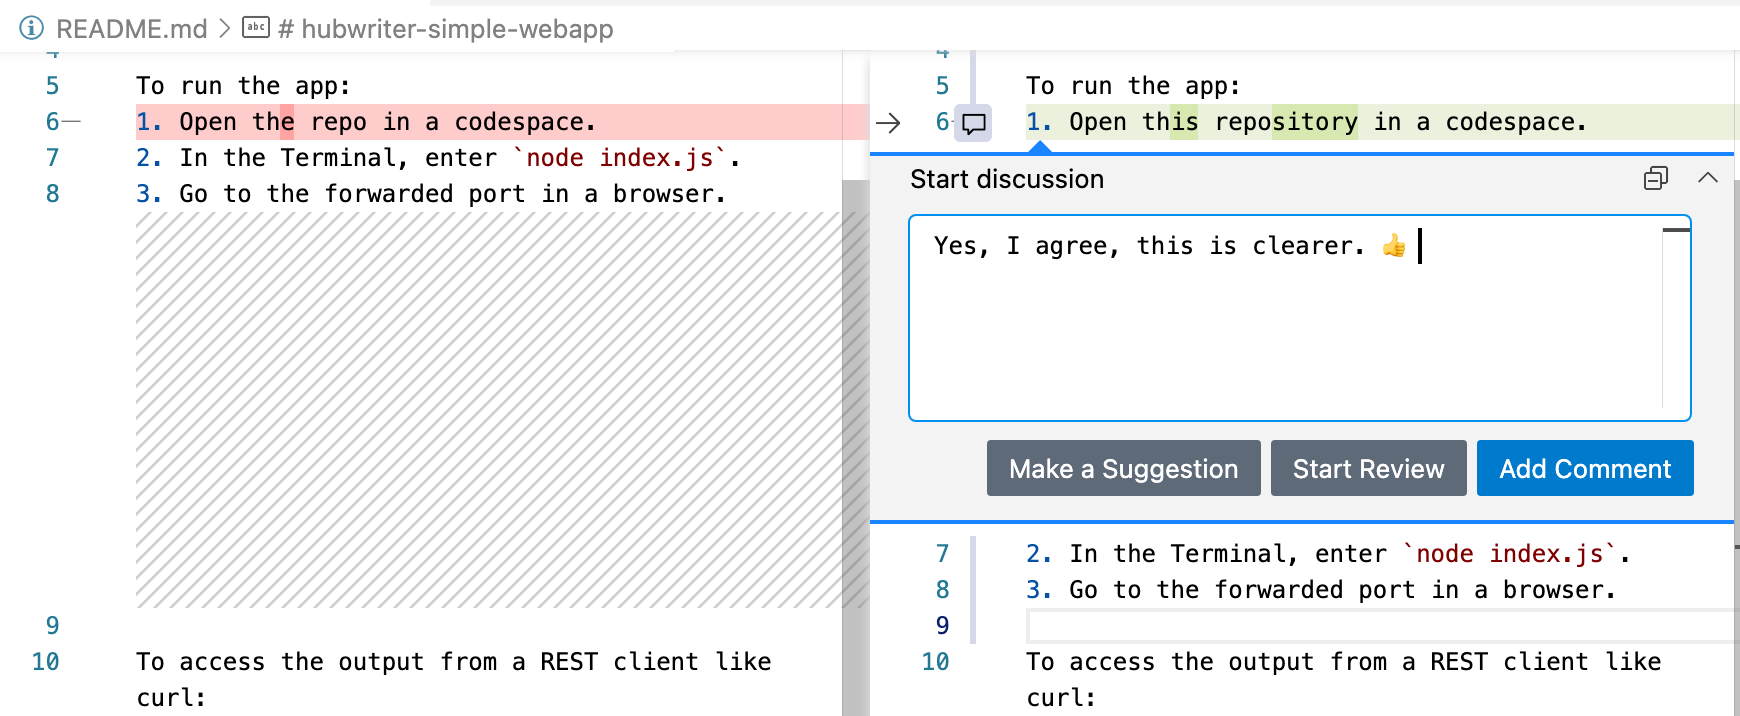 Option to open PR in a codespace.